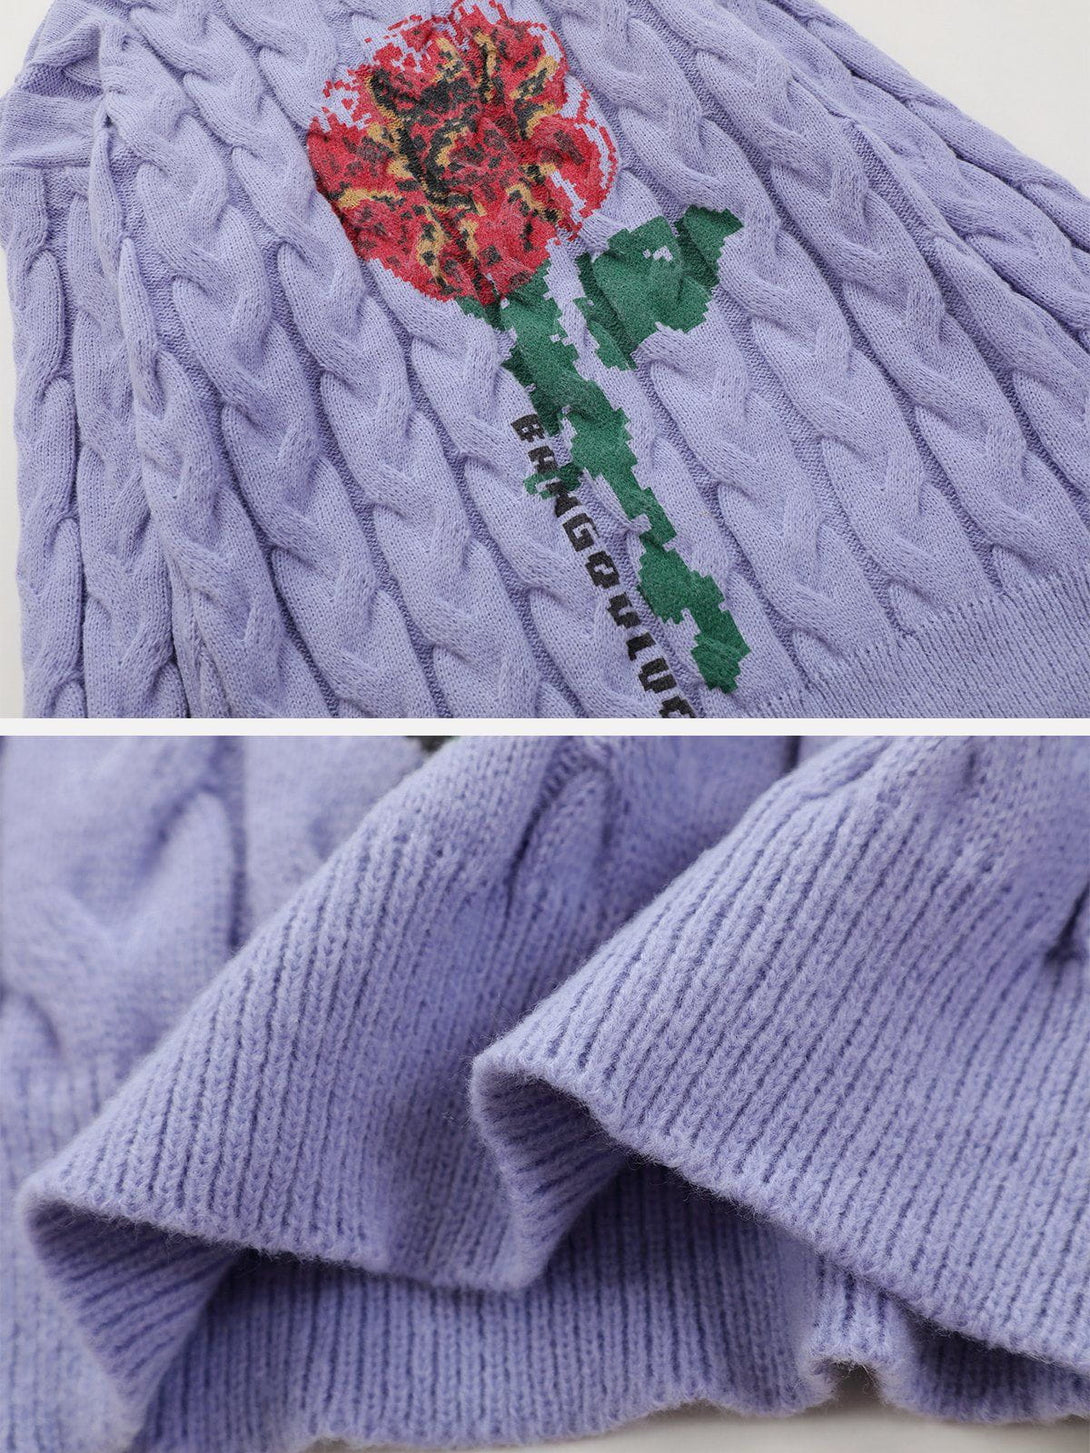 Majesda® - Flower Embroidery Sweater outfit ideas streetwear fashion